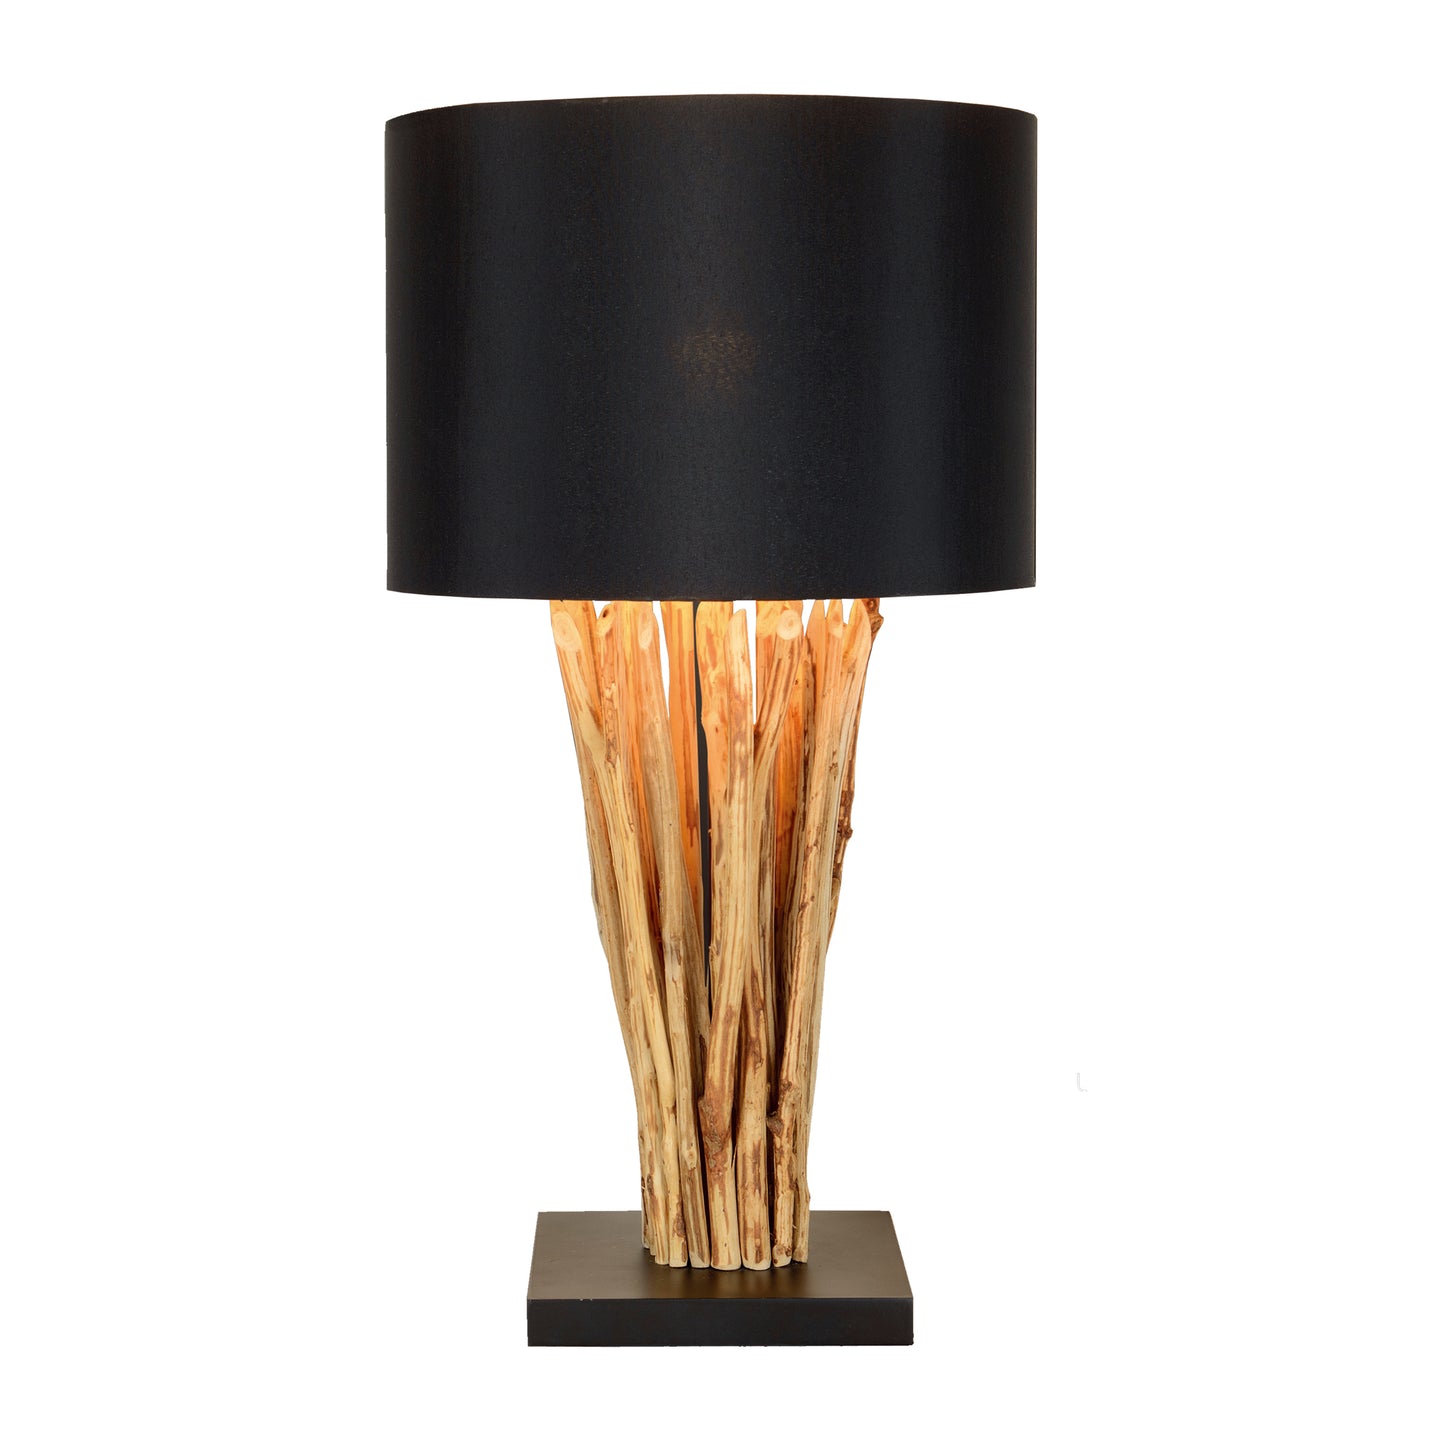 WOOD 25" BRANCH TABLE LAMP, BROWN